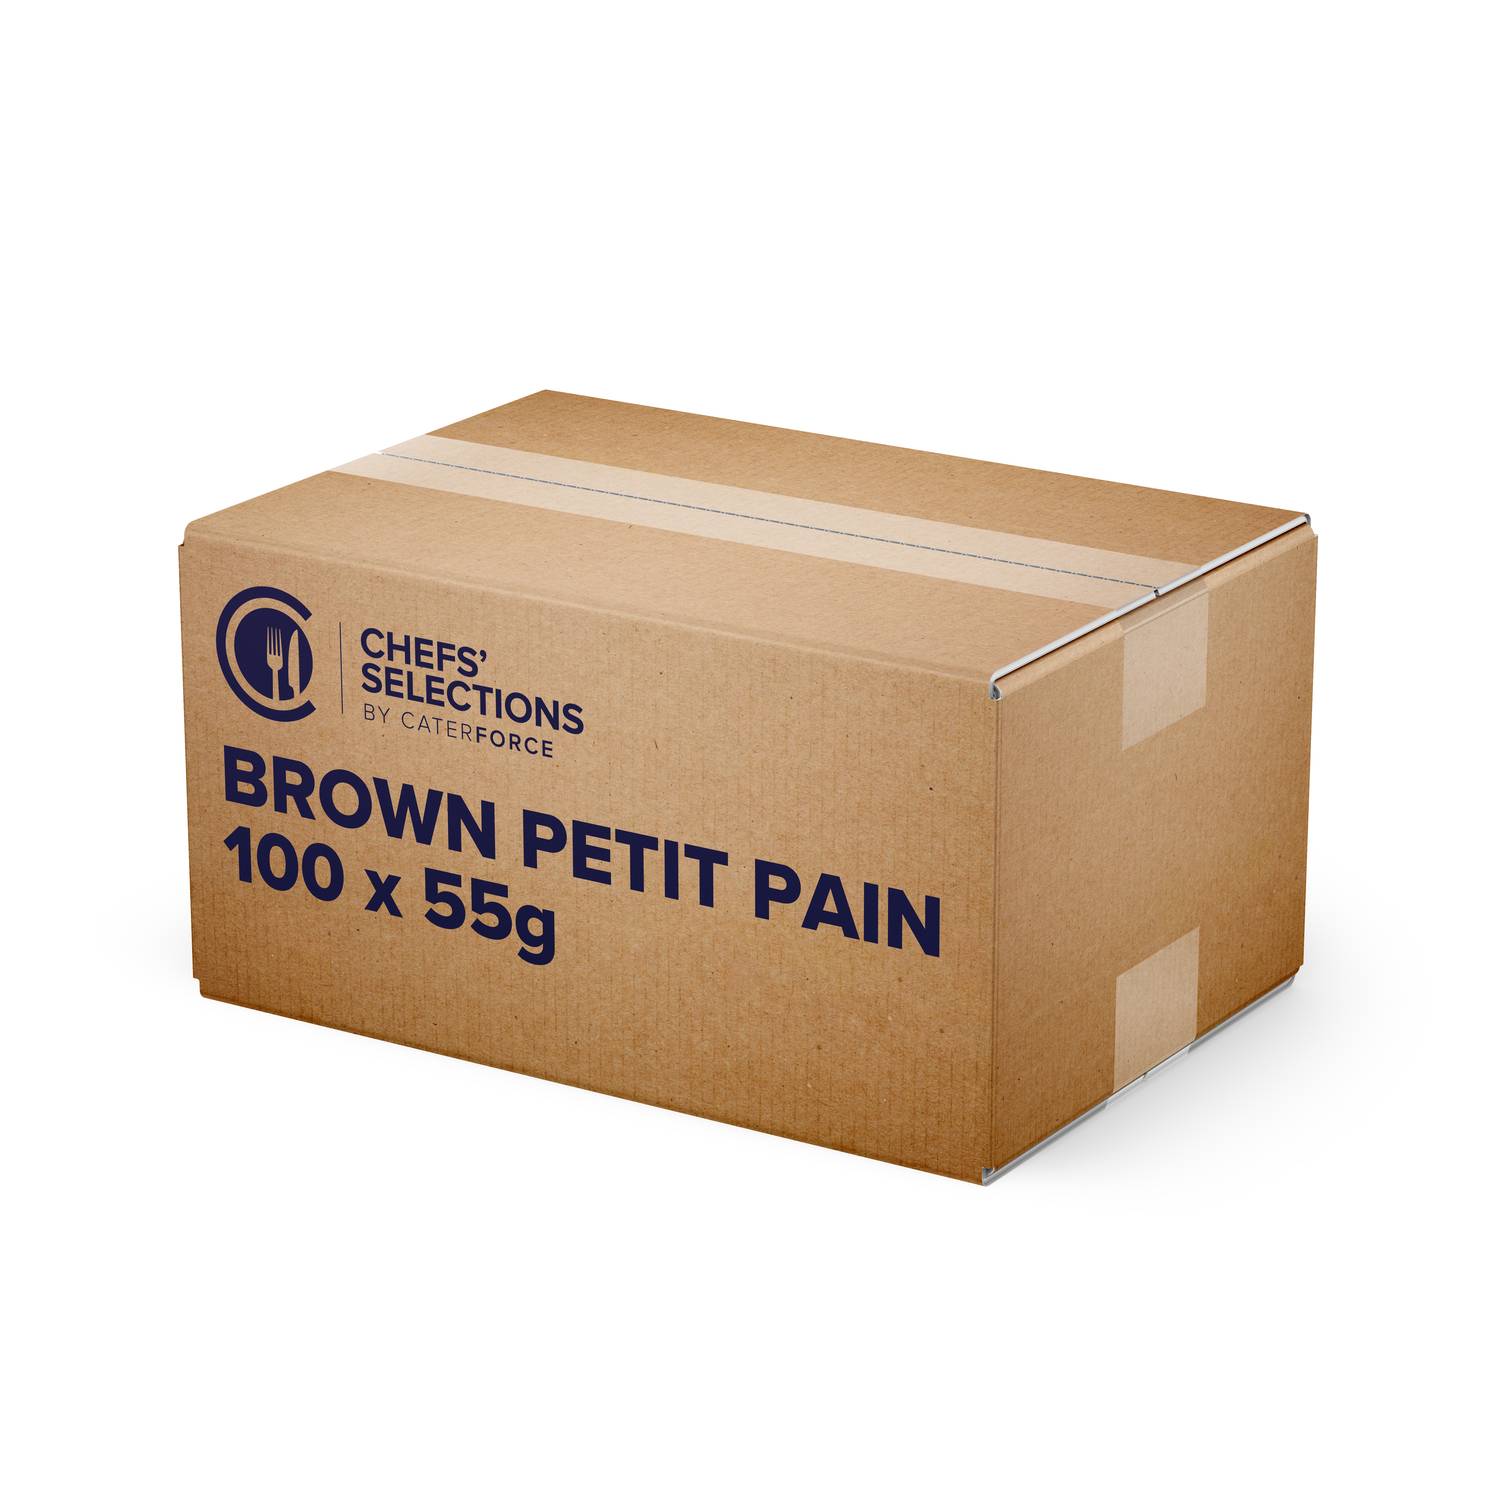 Chefs’ Selections Brown Petit Pain (100 x 55g)